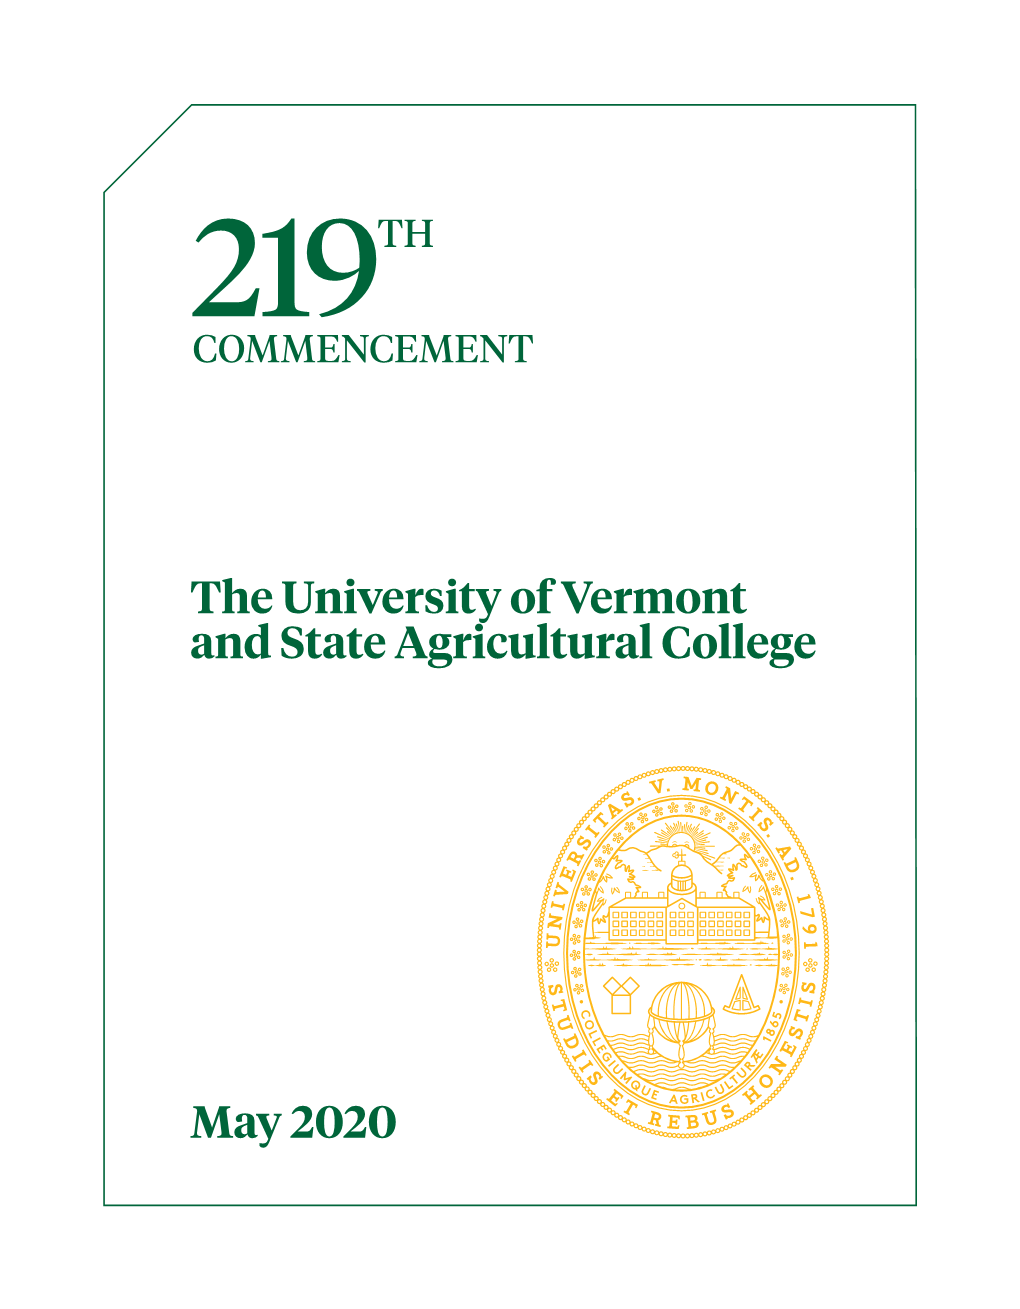 The University of Vermont and State Agricultural College May 2020